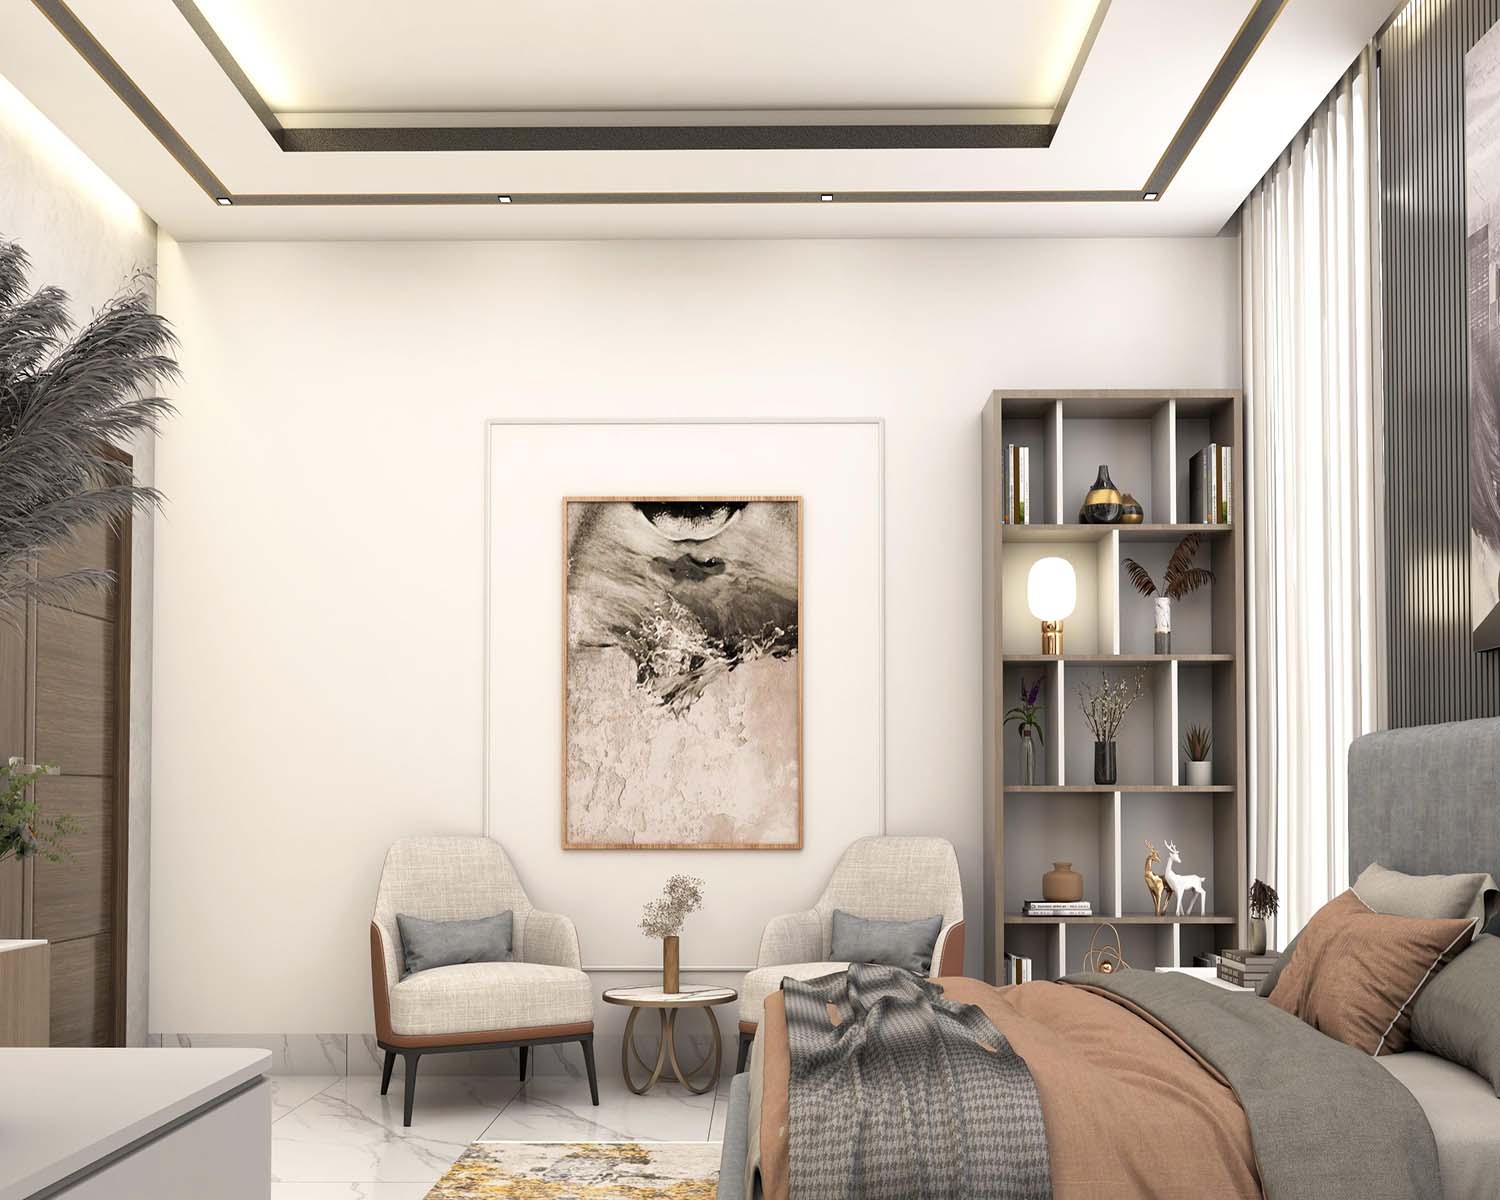 3d image of luxury bedroom interior in Business Bay, painting hanging on the wall just next to chairs and book shelf